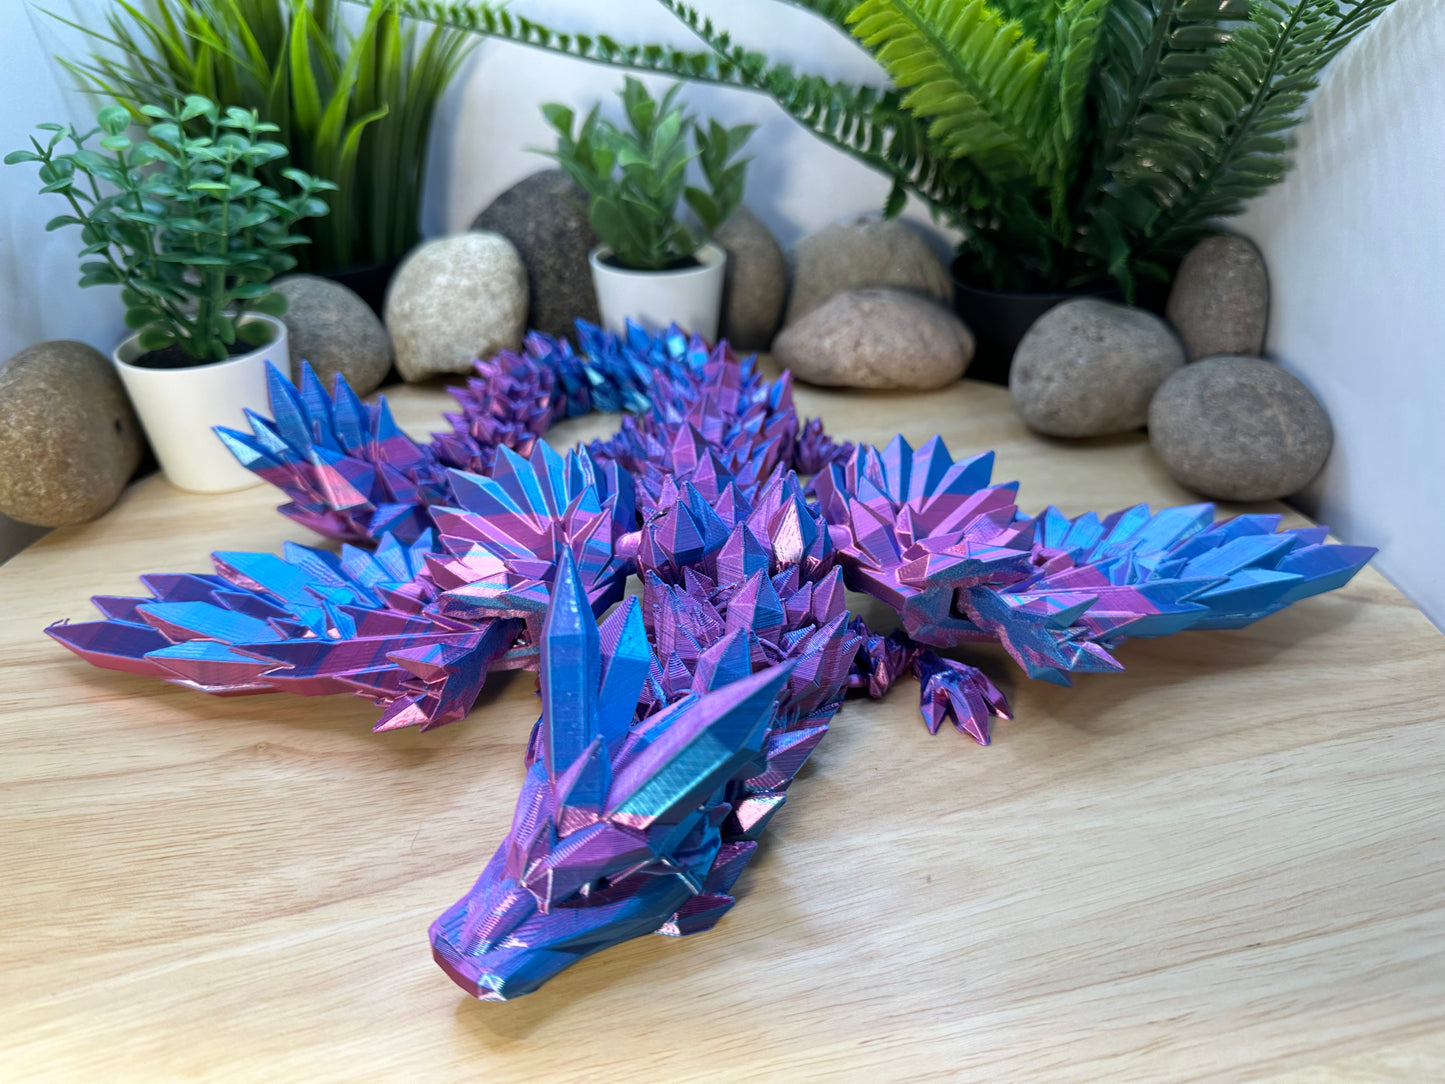 Crystalwing Dragons